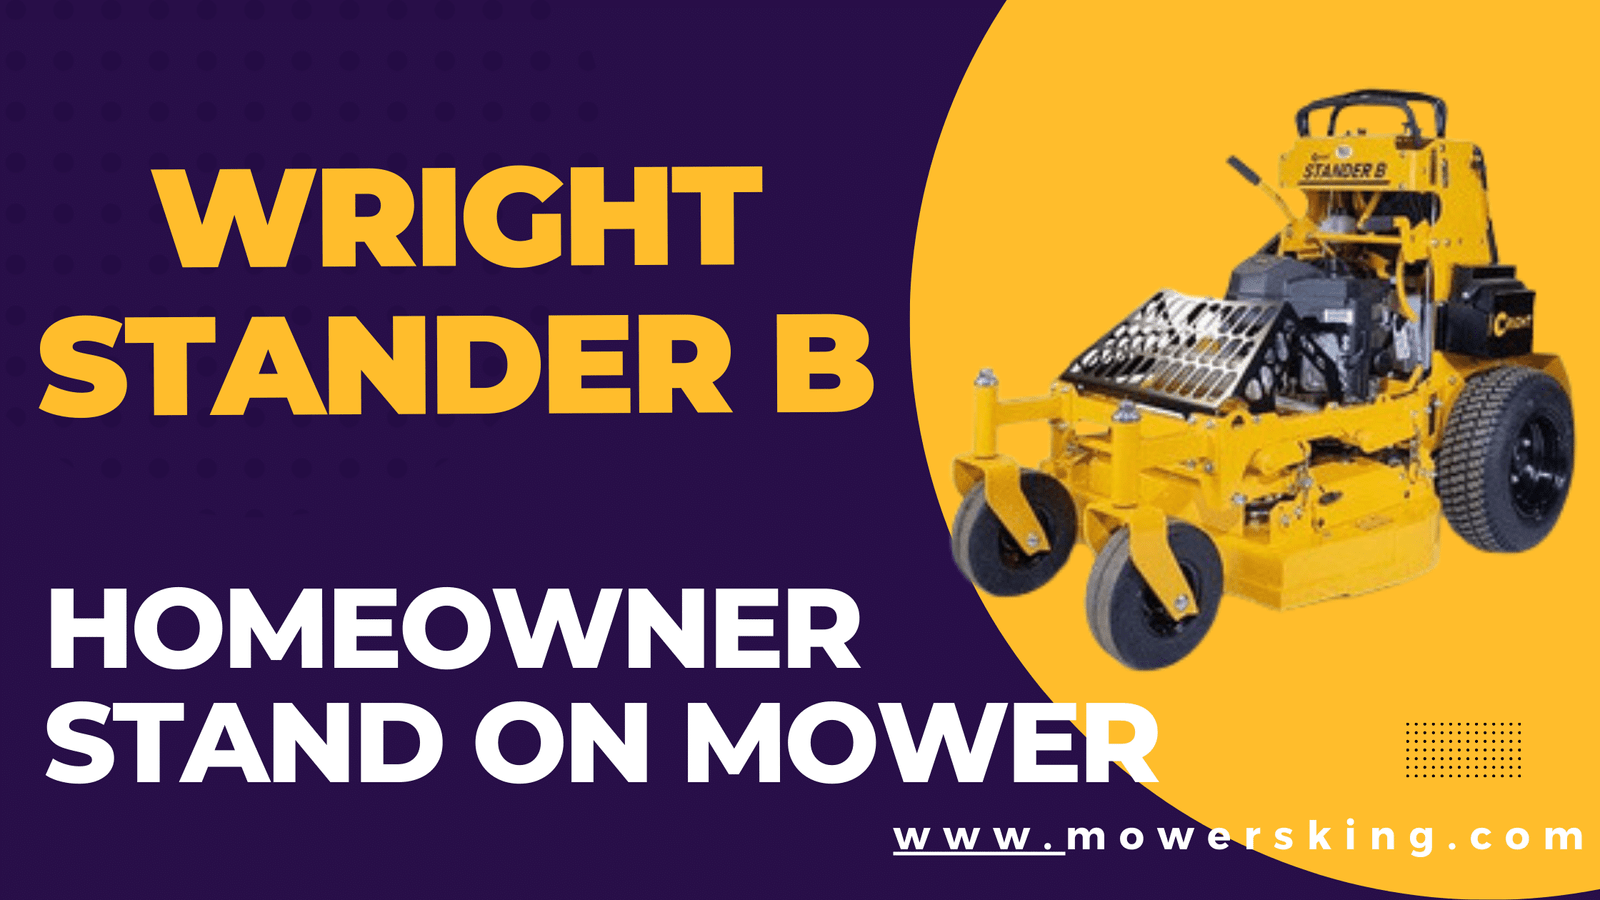 wright stander b 36 inches